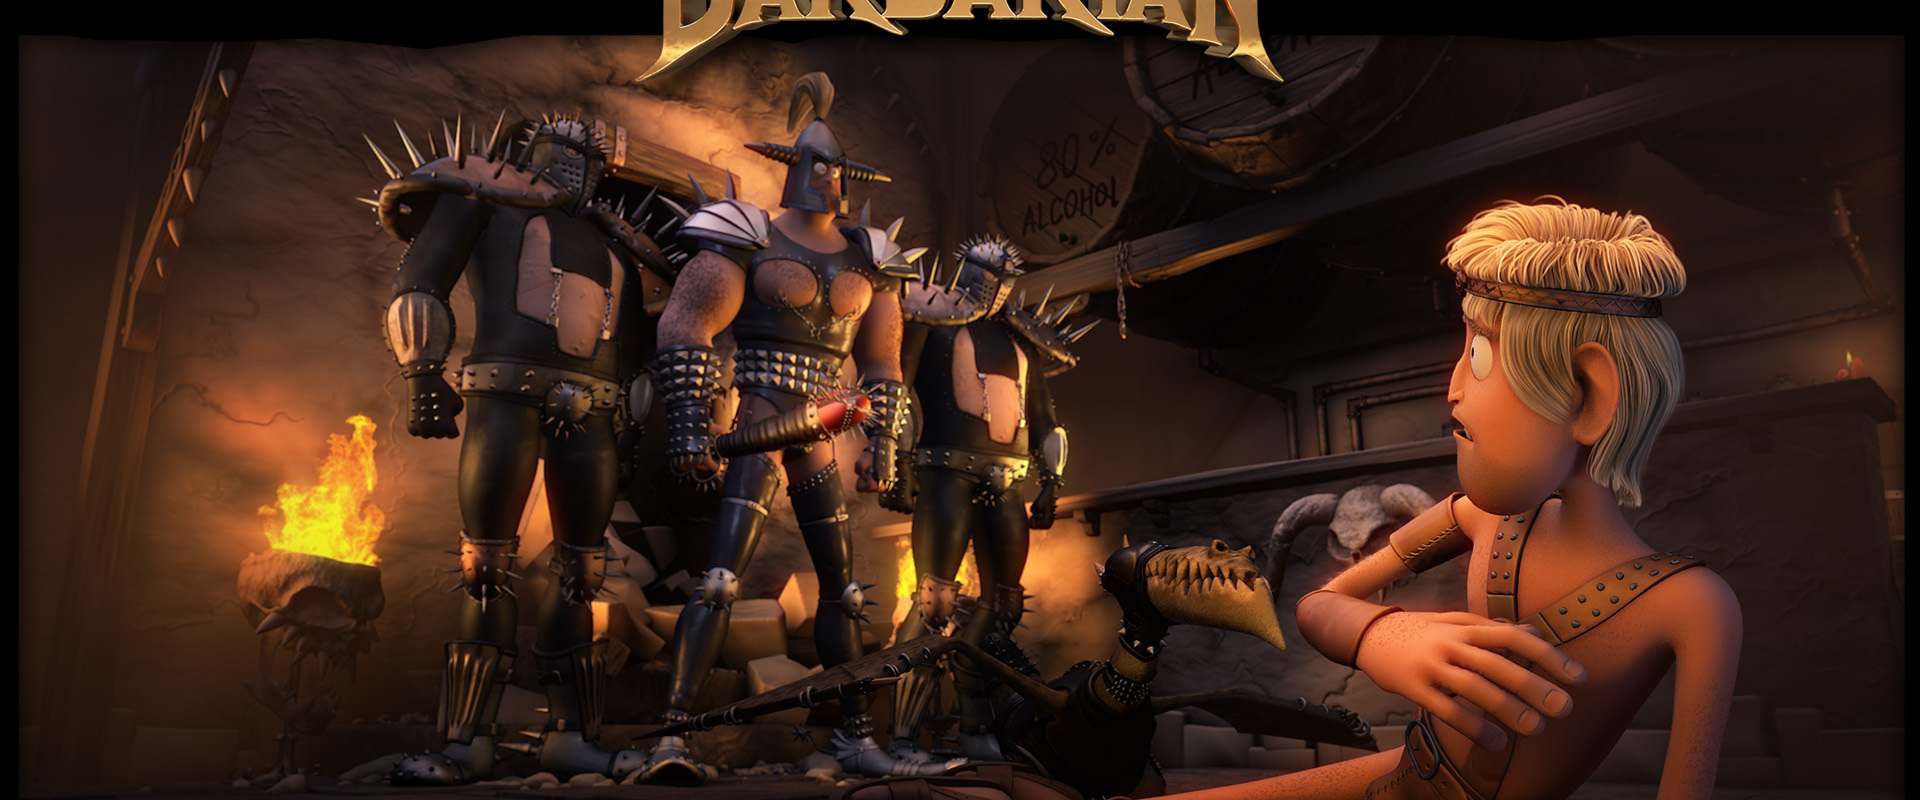 Ronal the Barbarian background 2